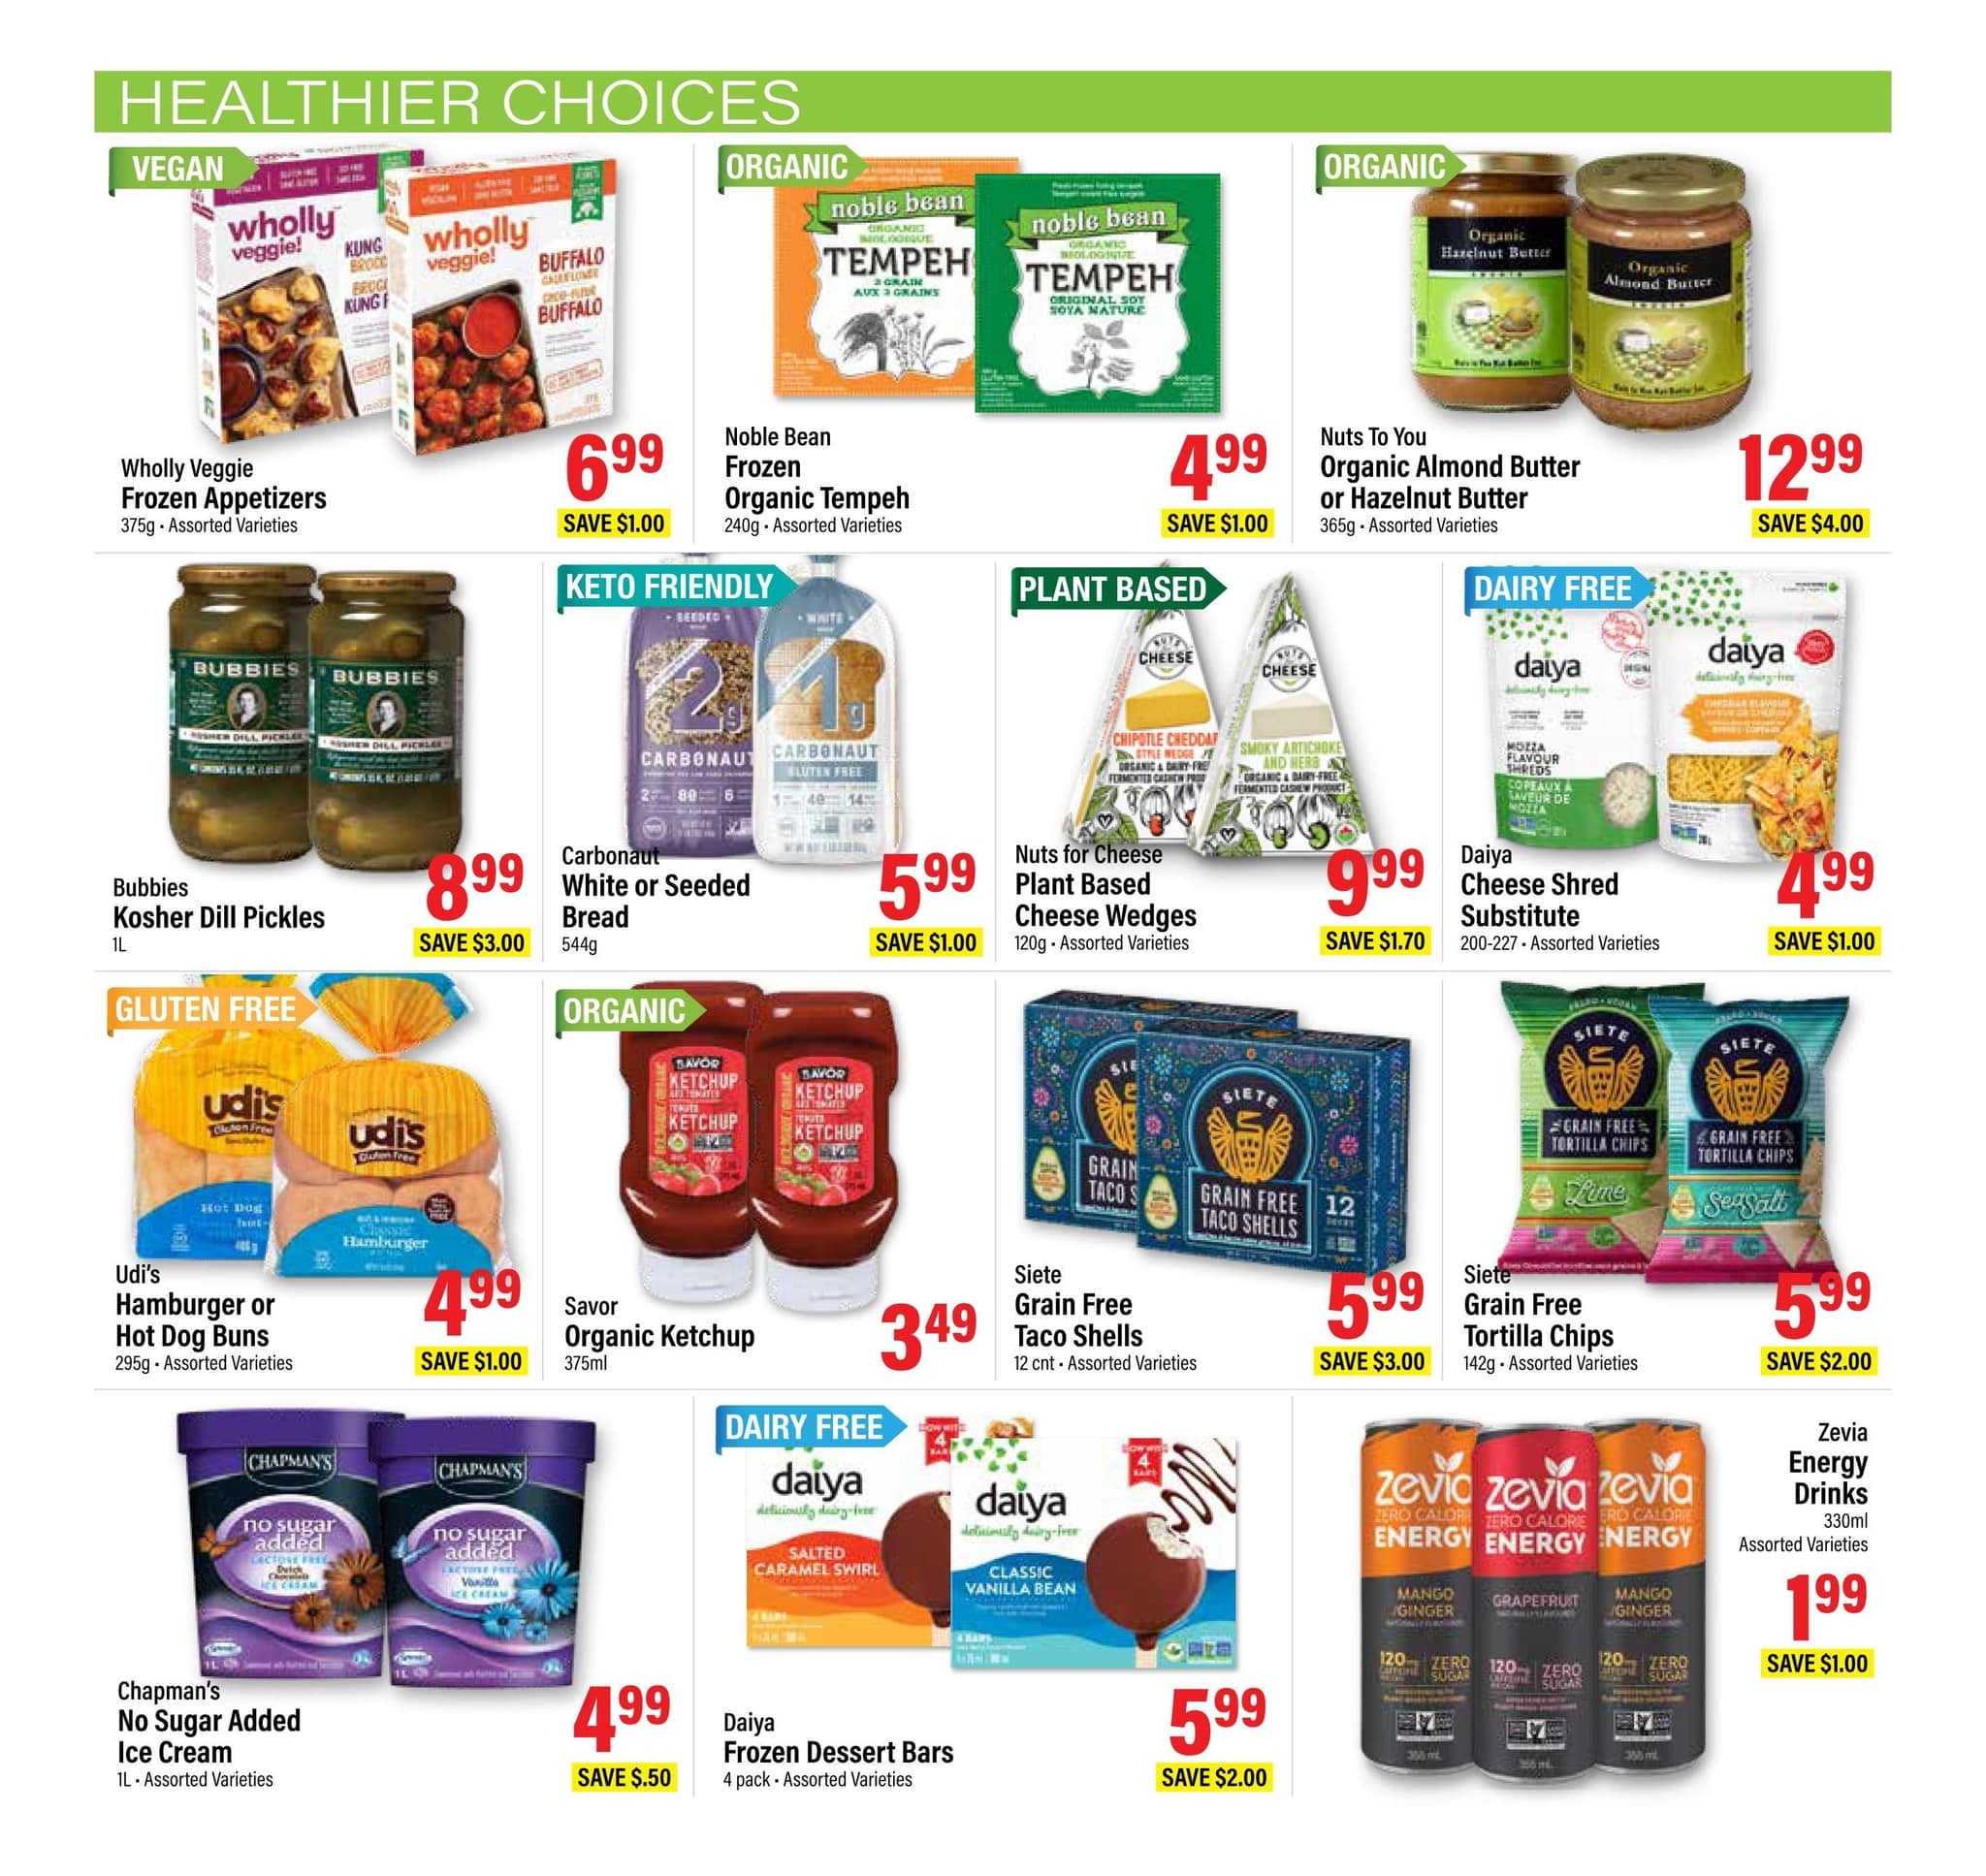 Commisso's Fresh Foods - Weekly Flyer Specials - Page 9